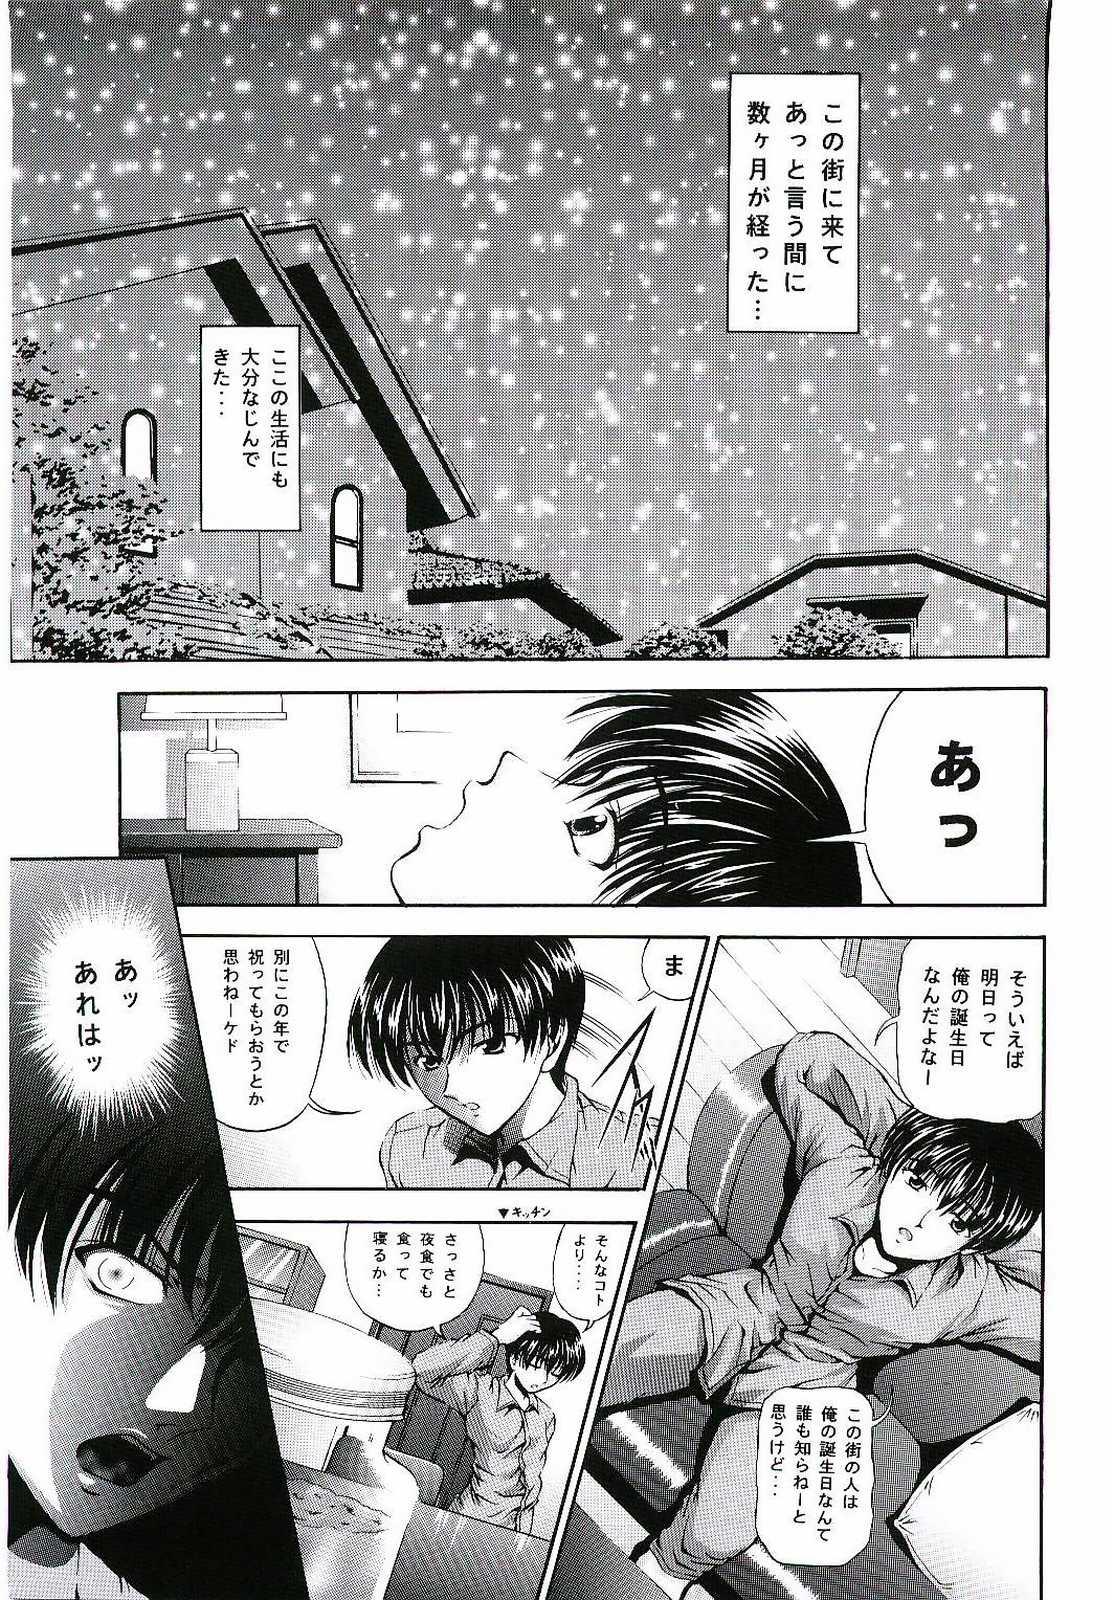 Raw Six Piece 1 - Kanon Old Vs Young - Page 4